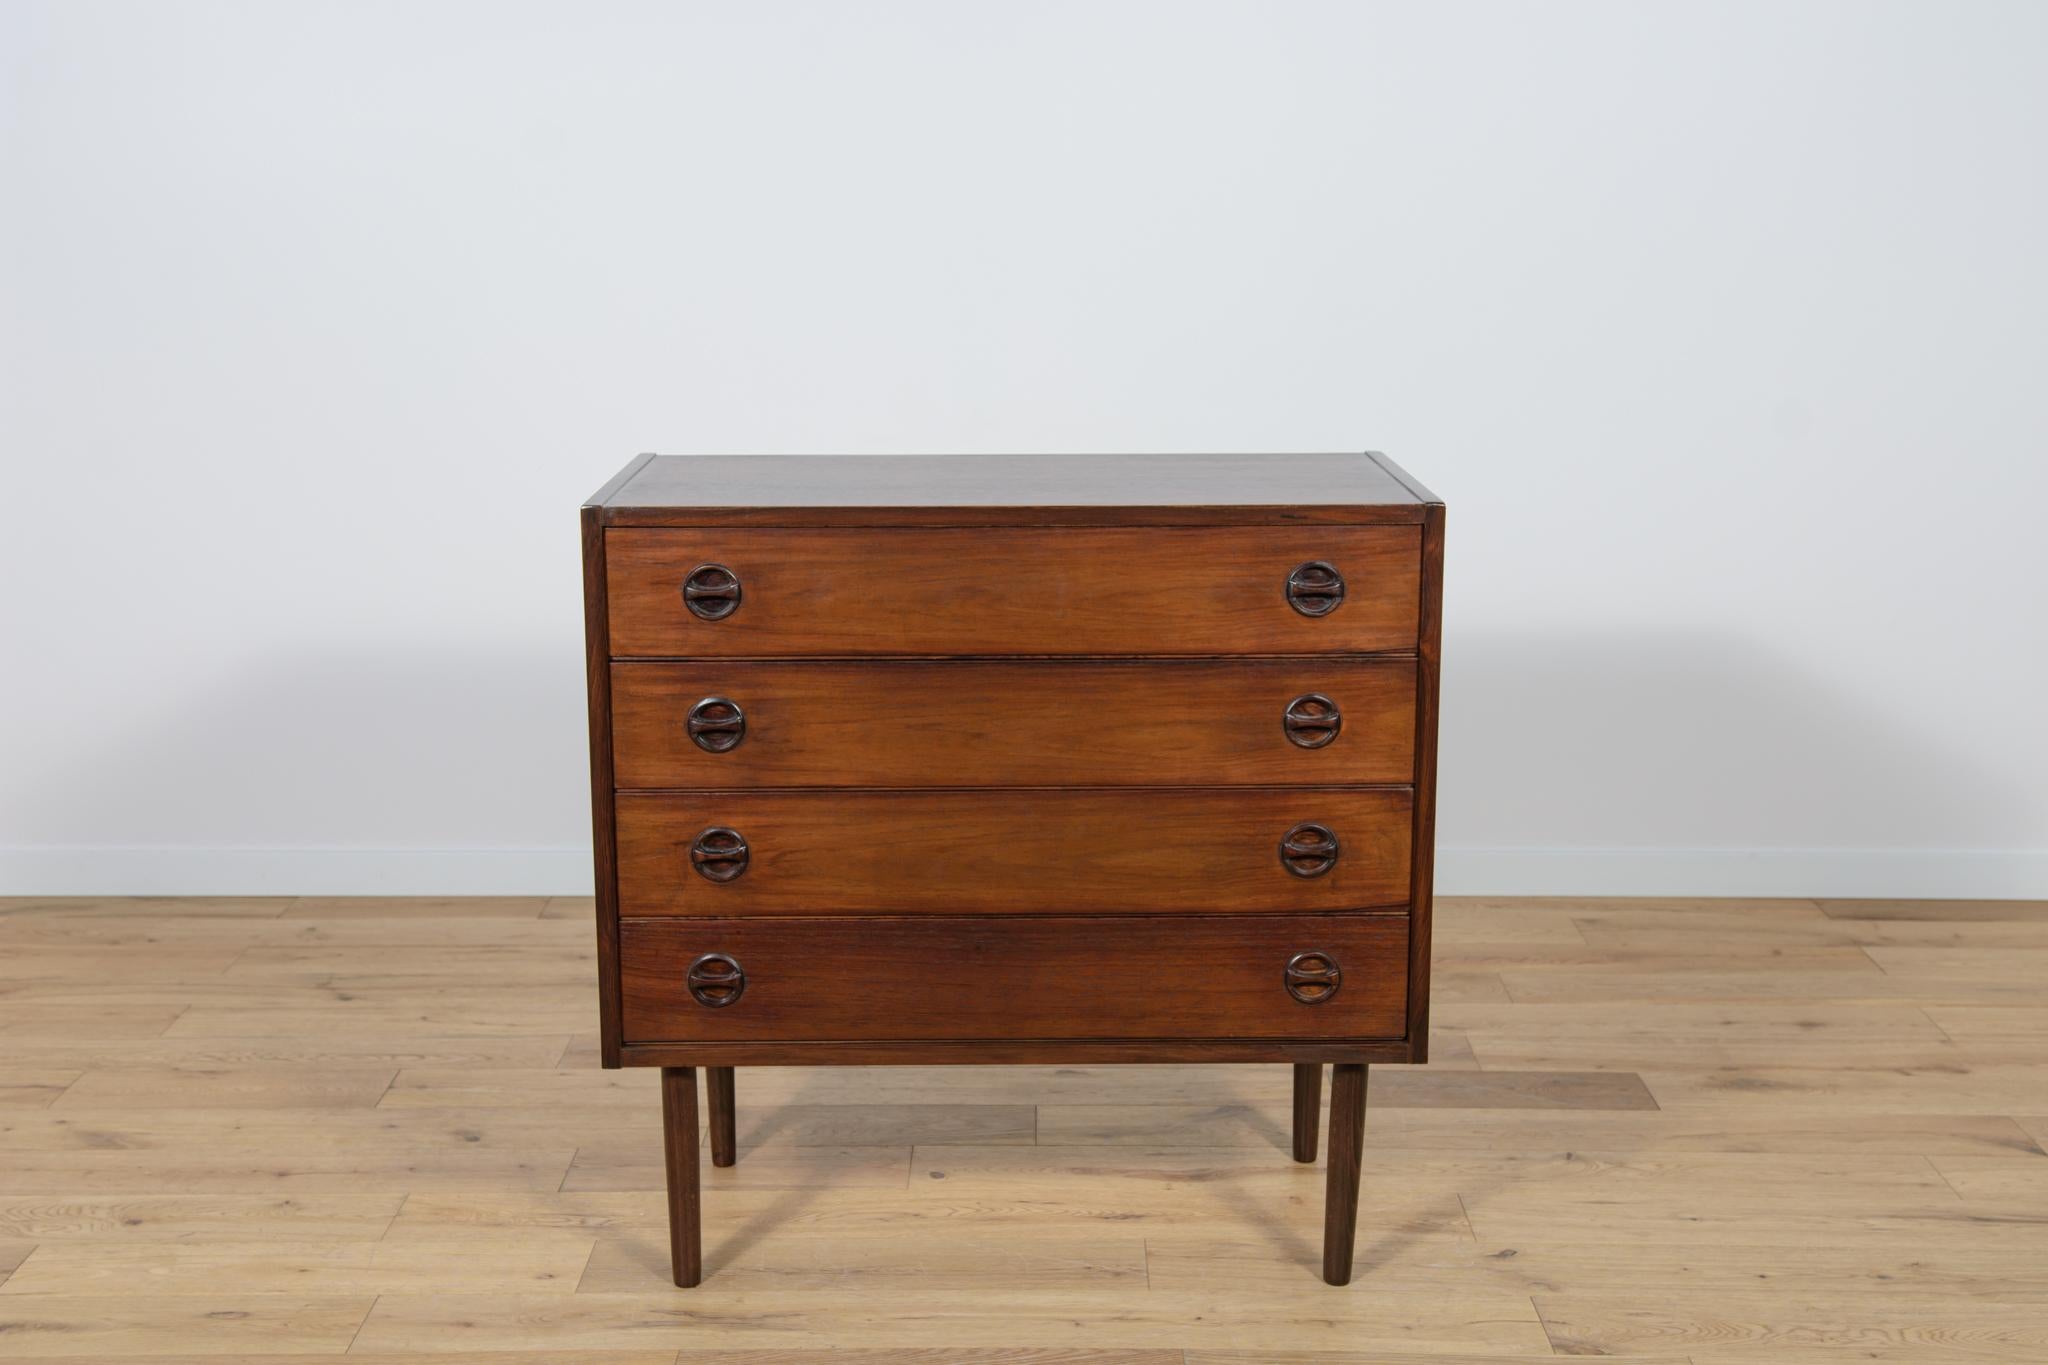 Mid-Century rosewood dresser made during the 1970s in the Denmark. The dresser with an extraordinary design, made with attention to every detail, has profiled handles and edges, adding elegance to it. The dresser consists of 4 drawers.
The dresser